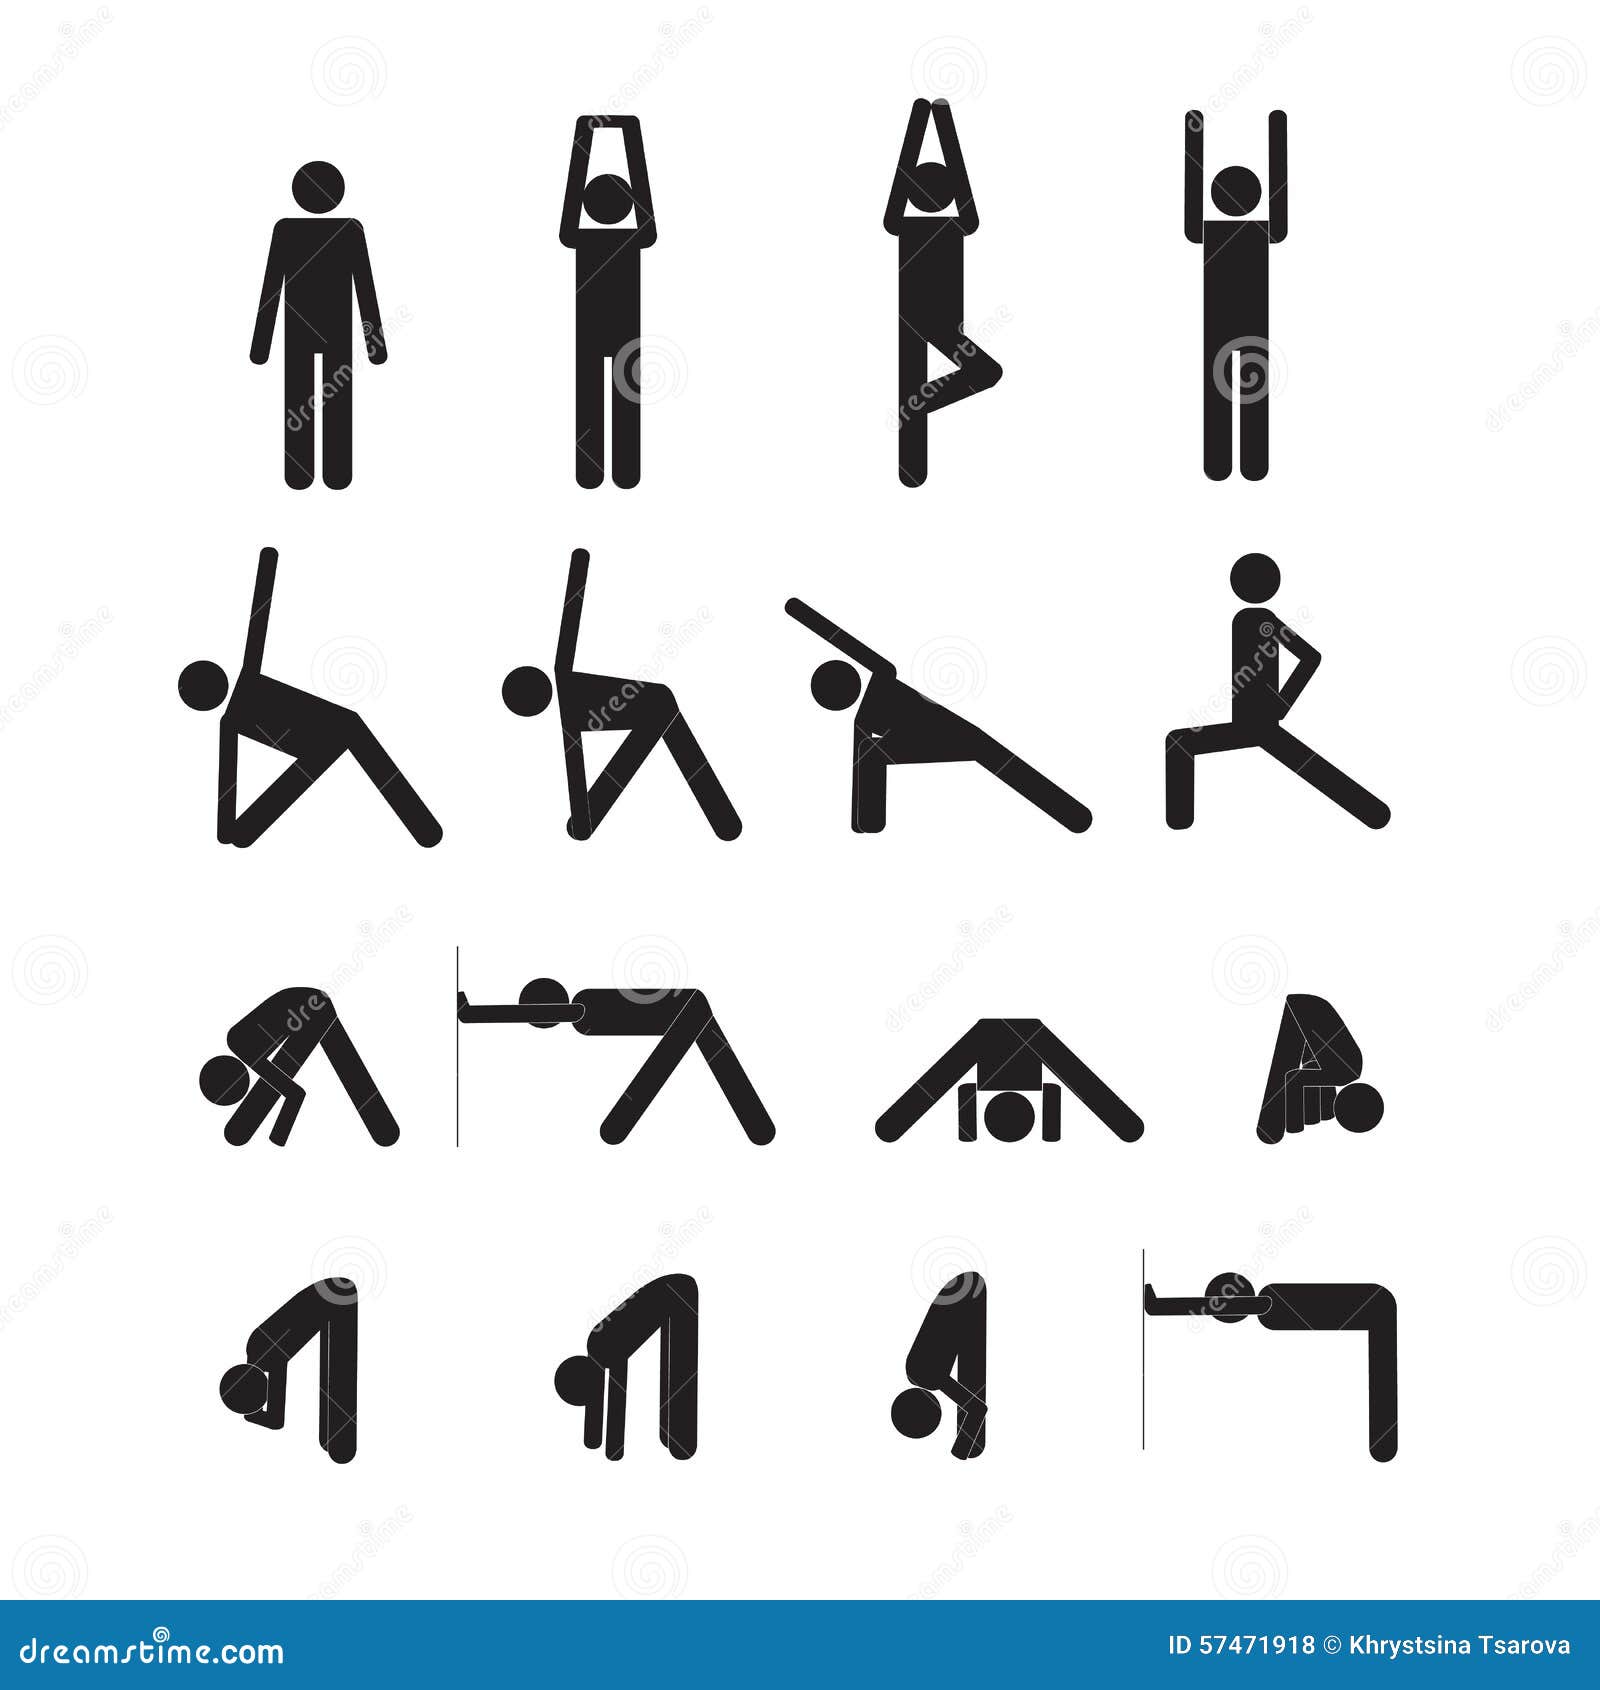 Yoga stick man stock vector. Illustration of muscle, posture - 57471918